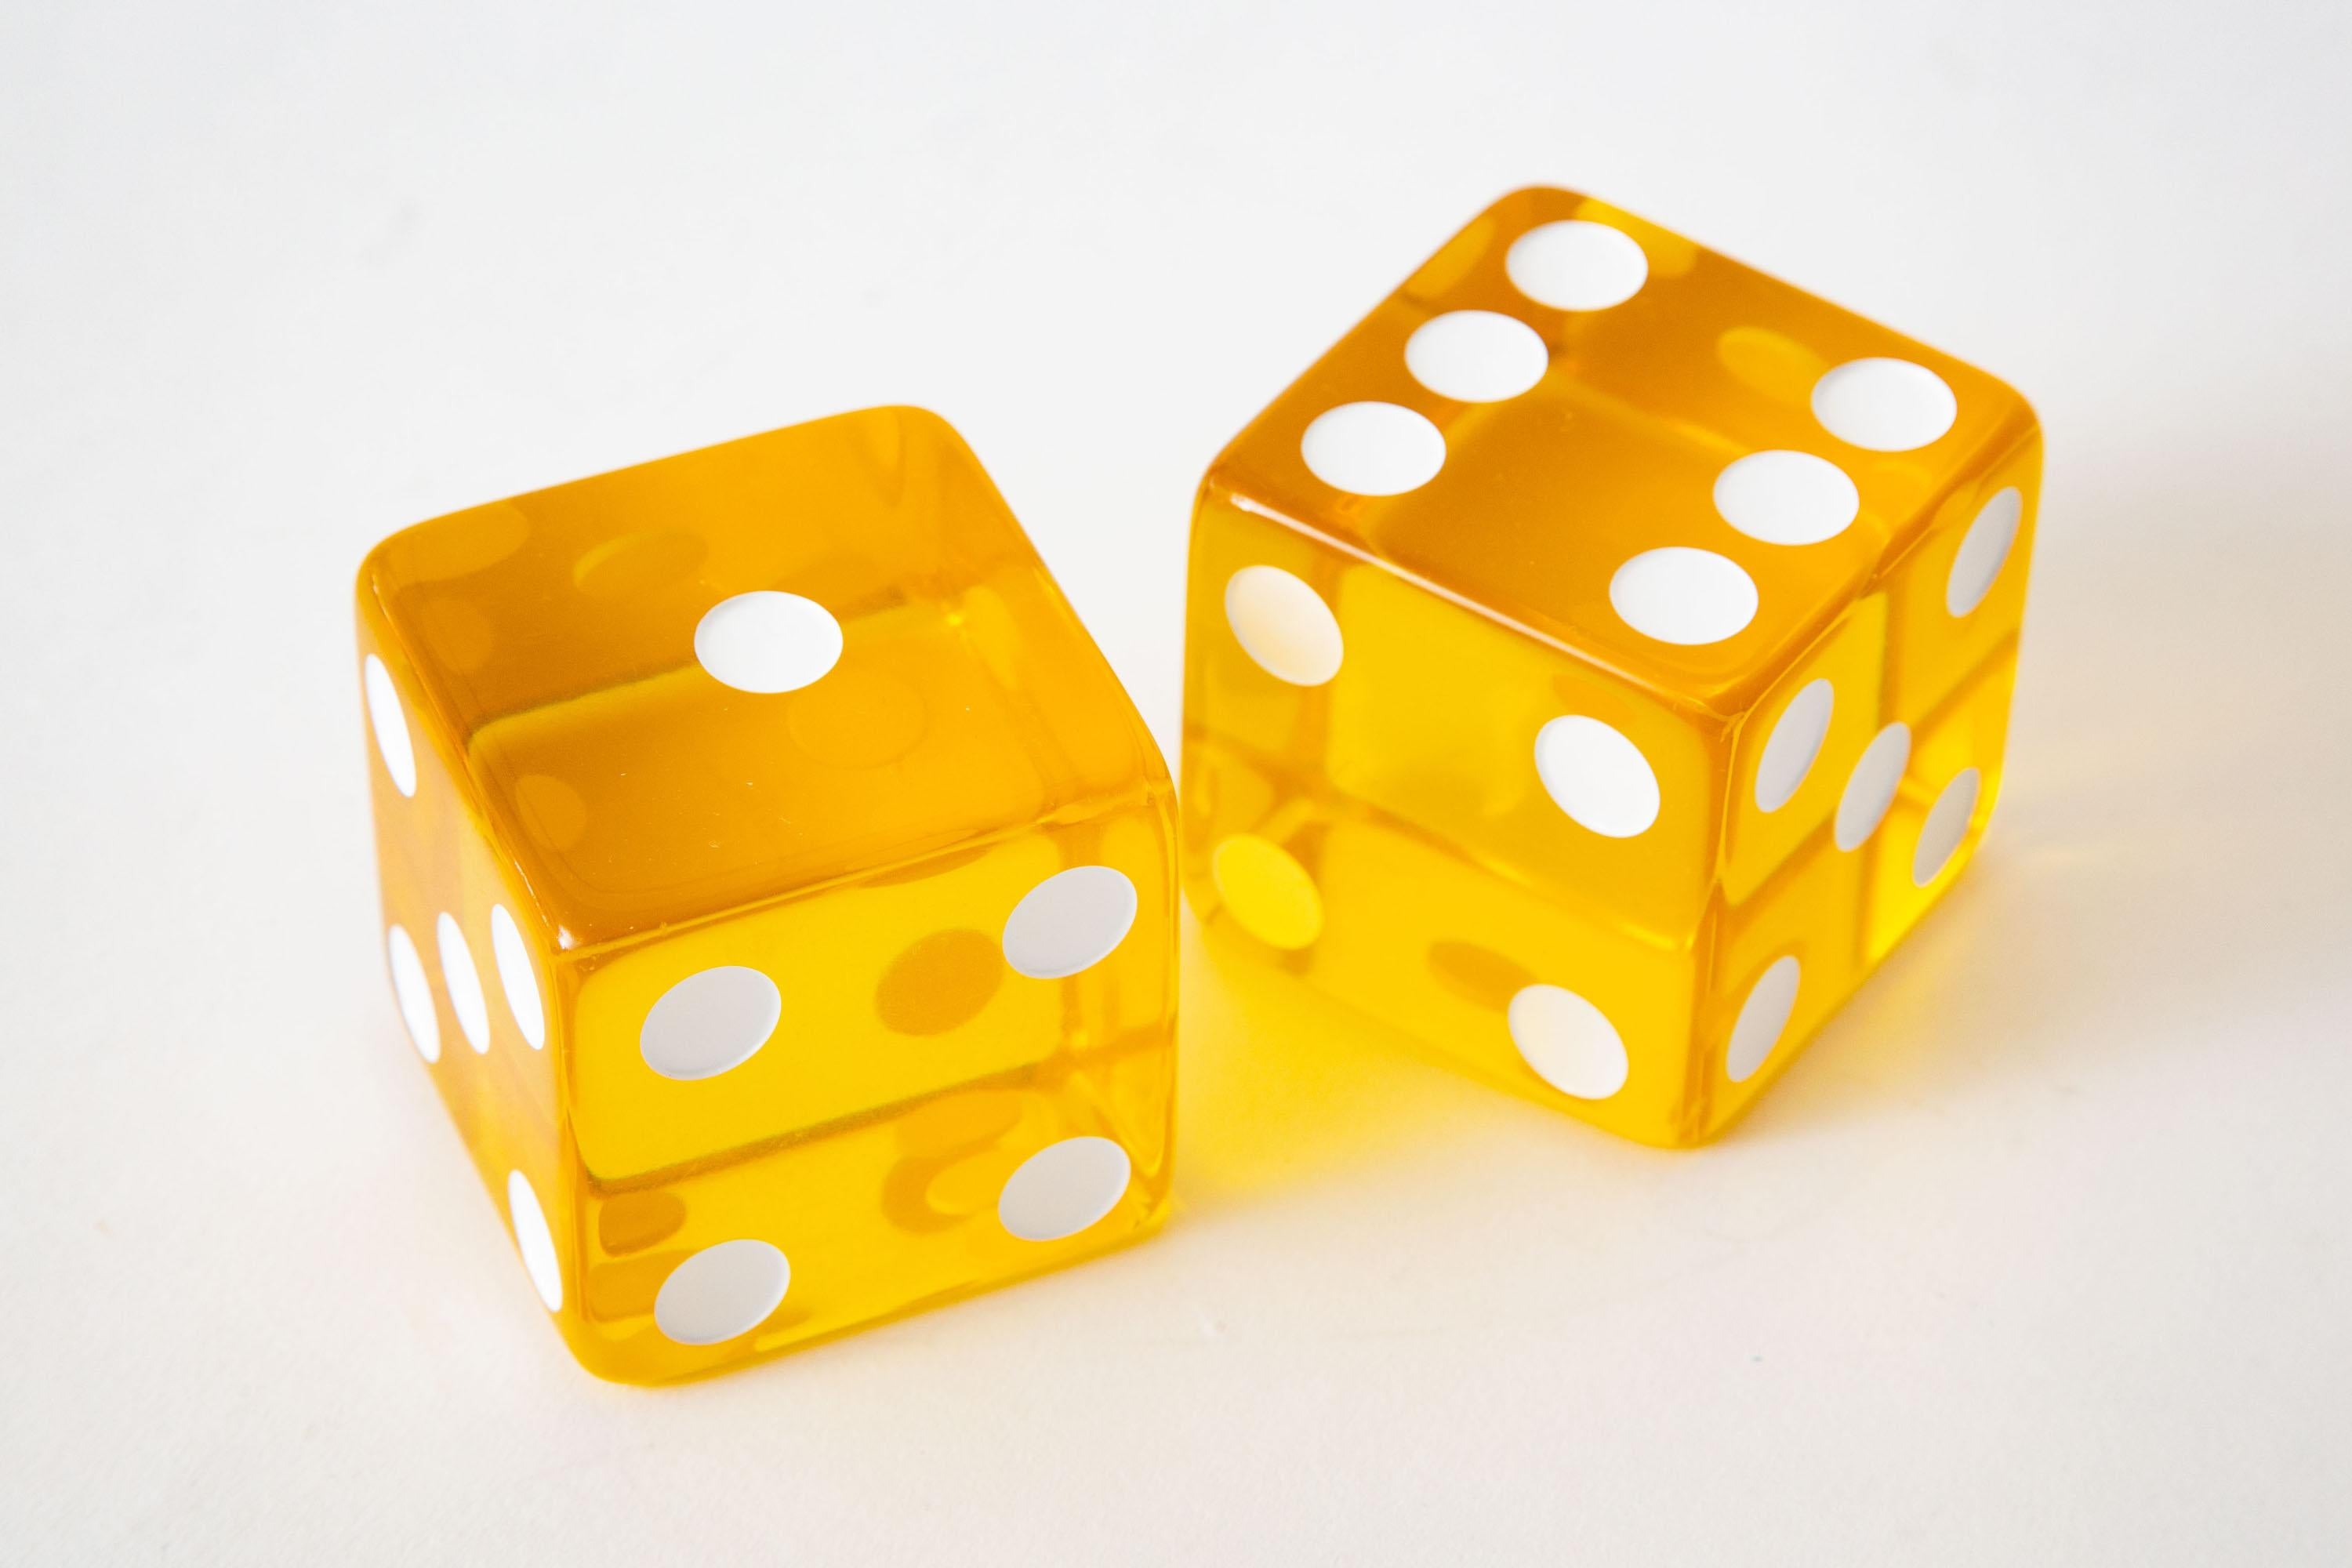 American  Lucite Yellow and White Square Dice Sculptures Vintage Pair Of